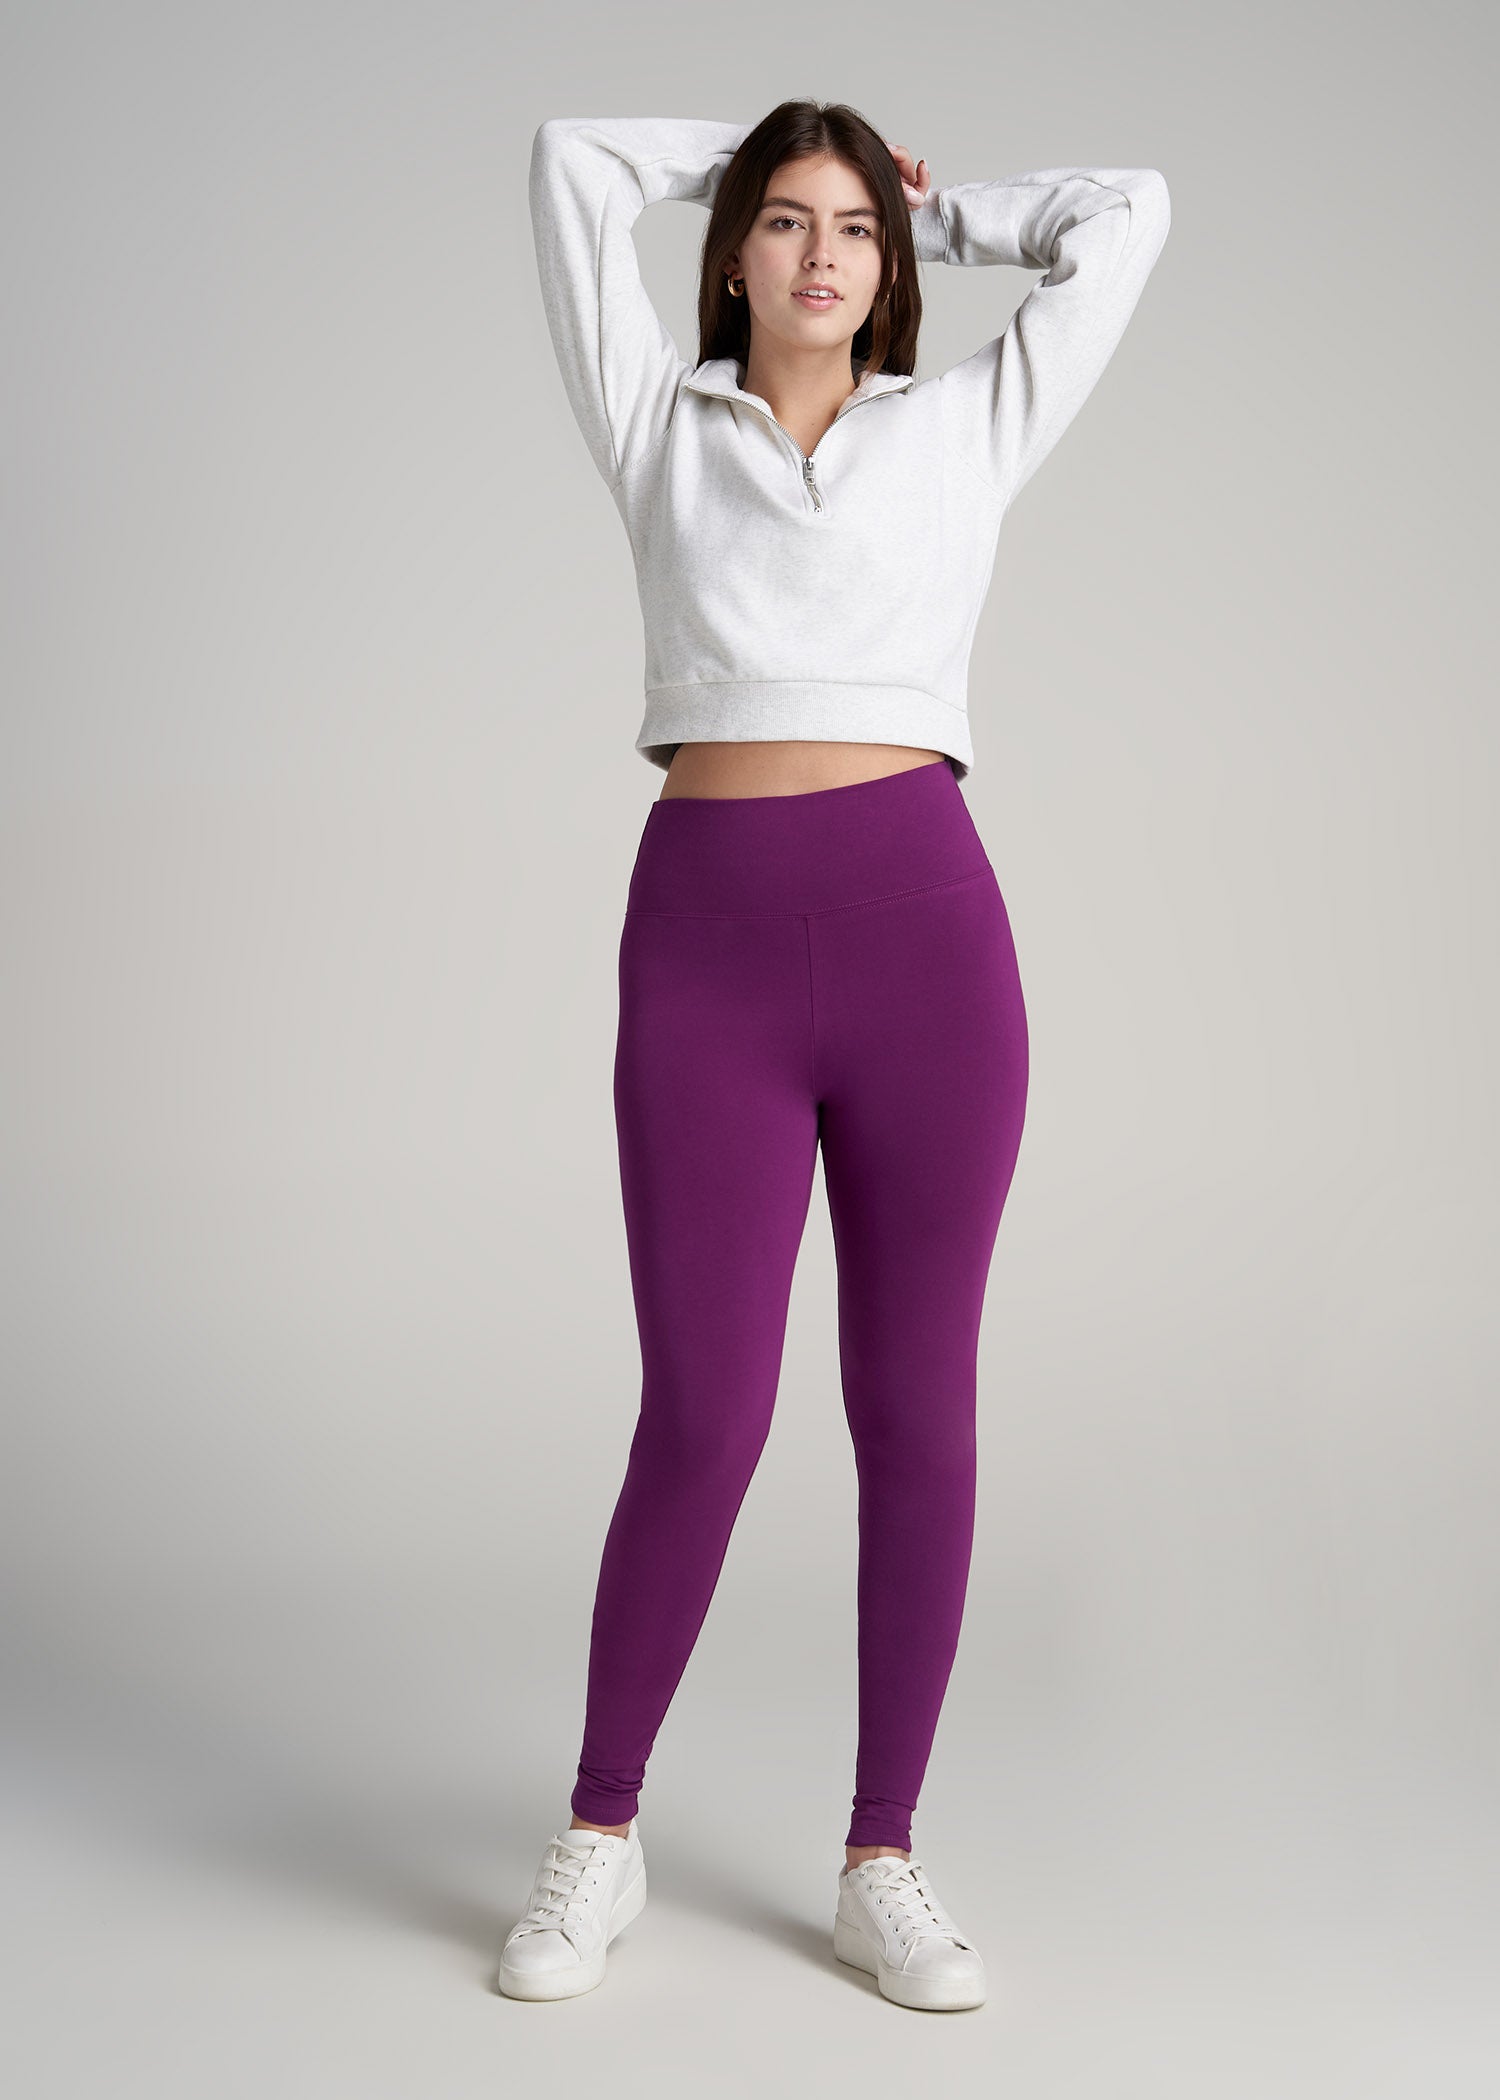 Activewear for Tall Women  Long Leggings & Tall Fit - HEIGHT-OF